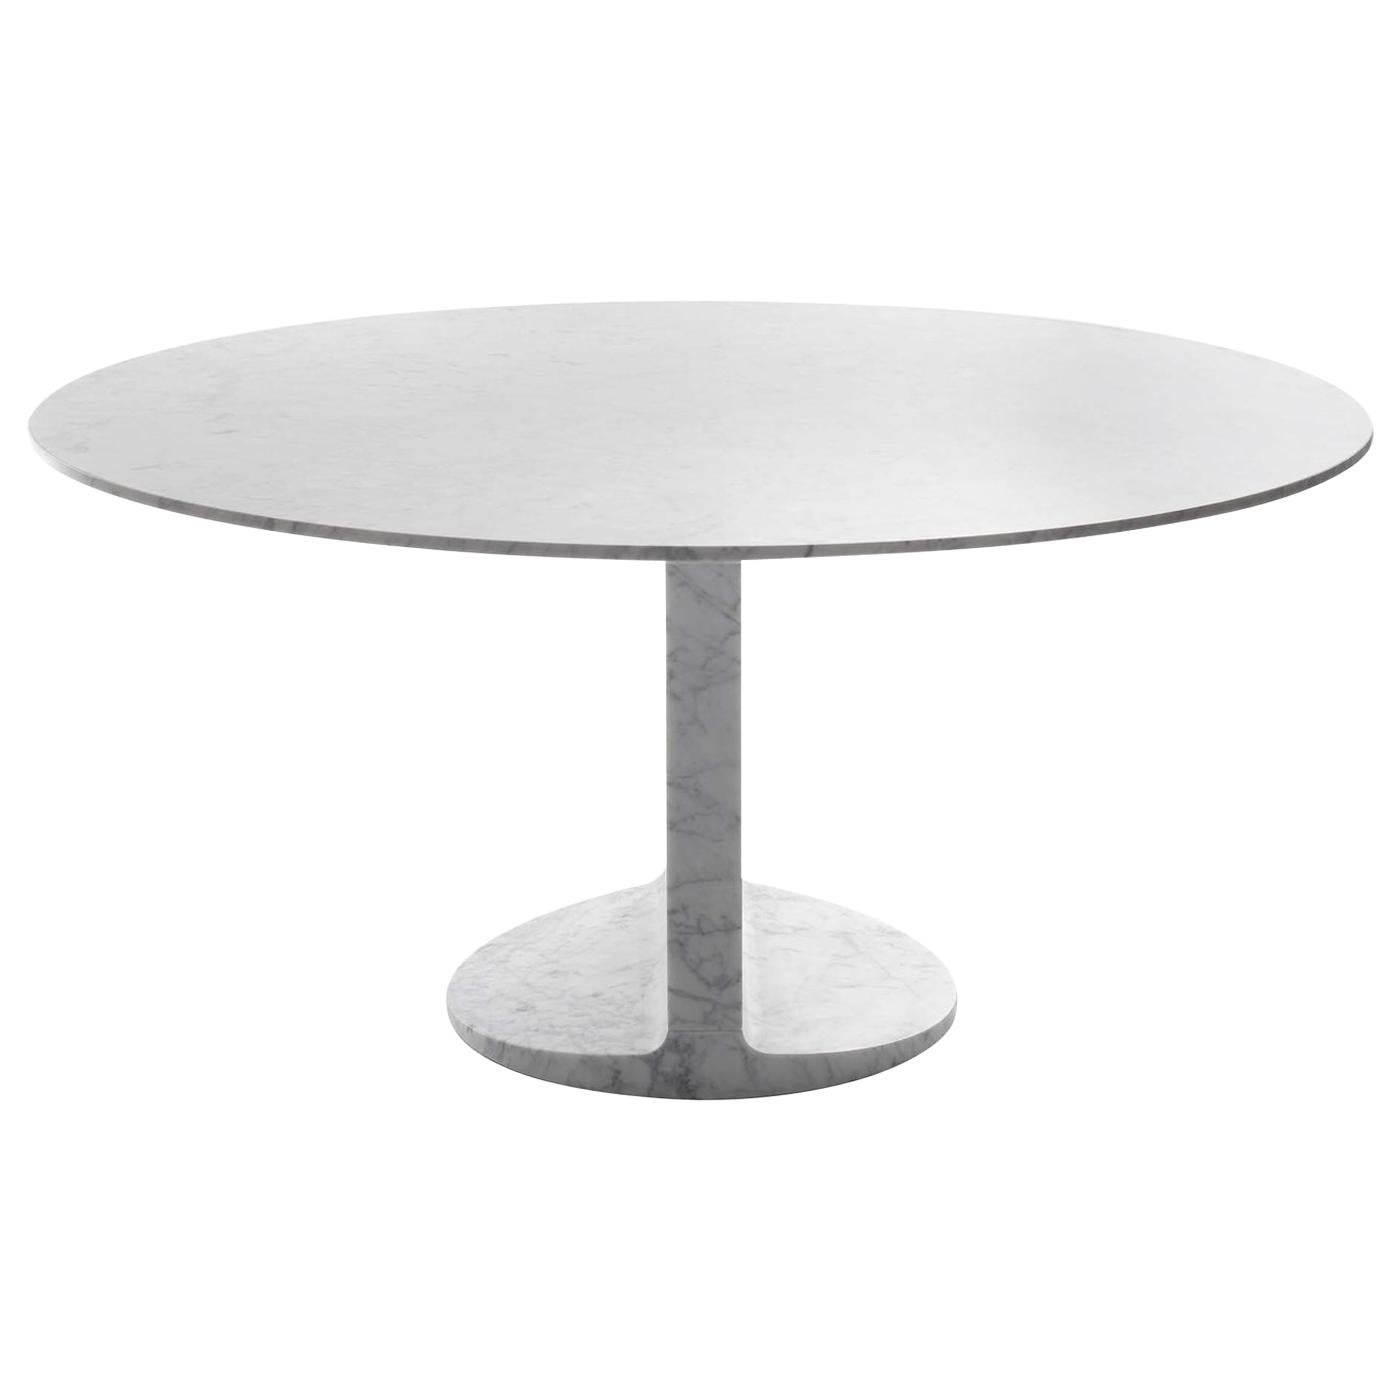 Mimmo Dining Table, Design James Irvine, 2010